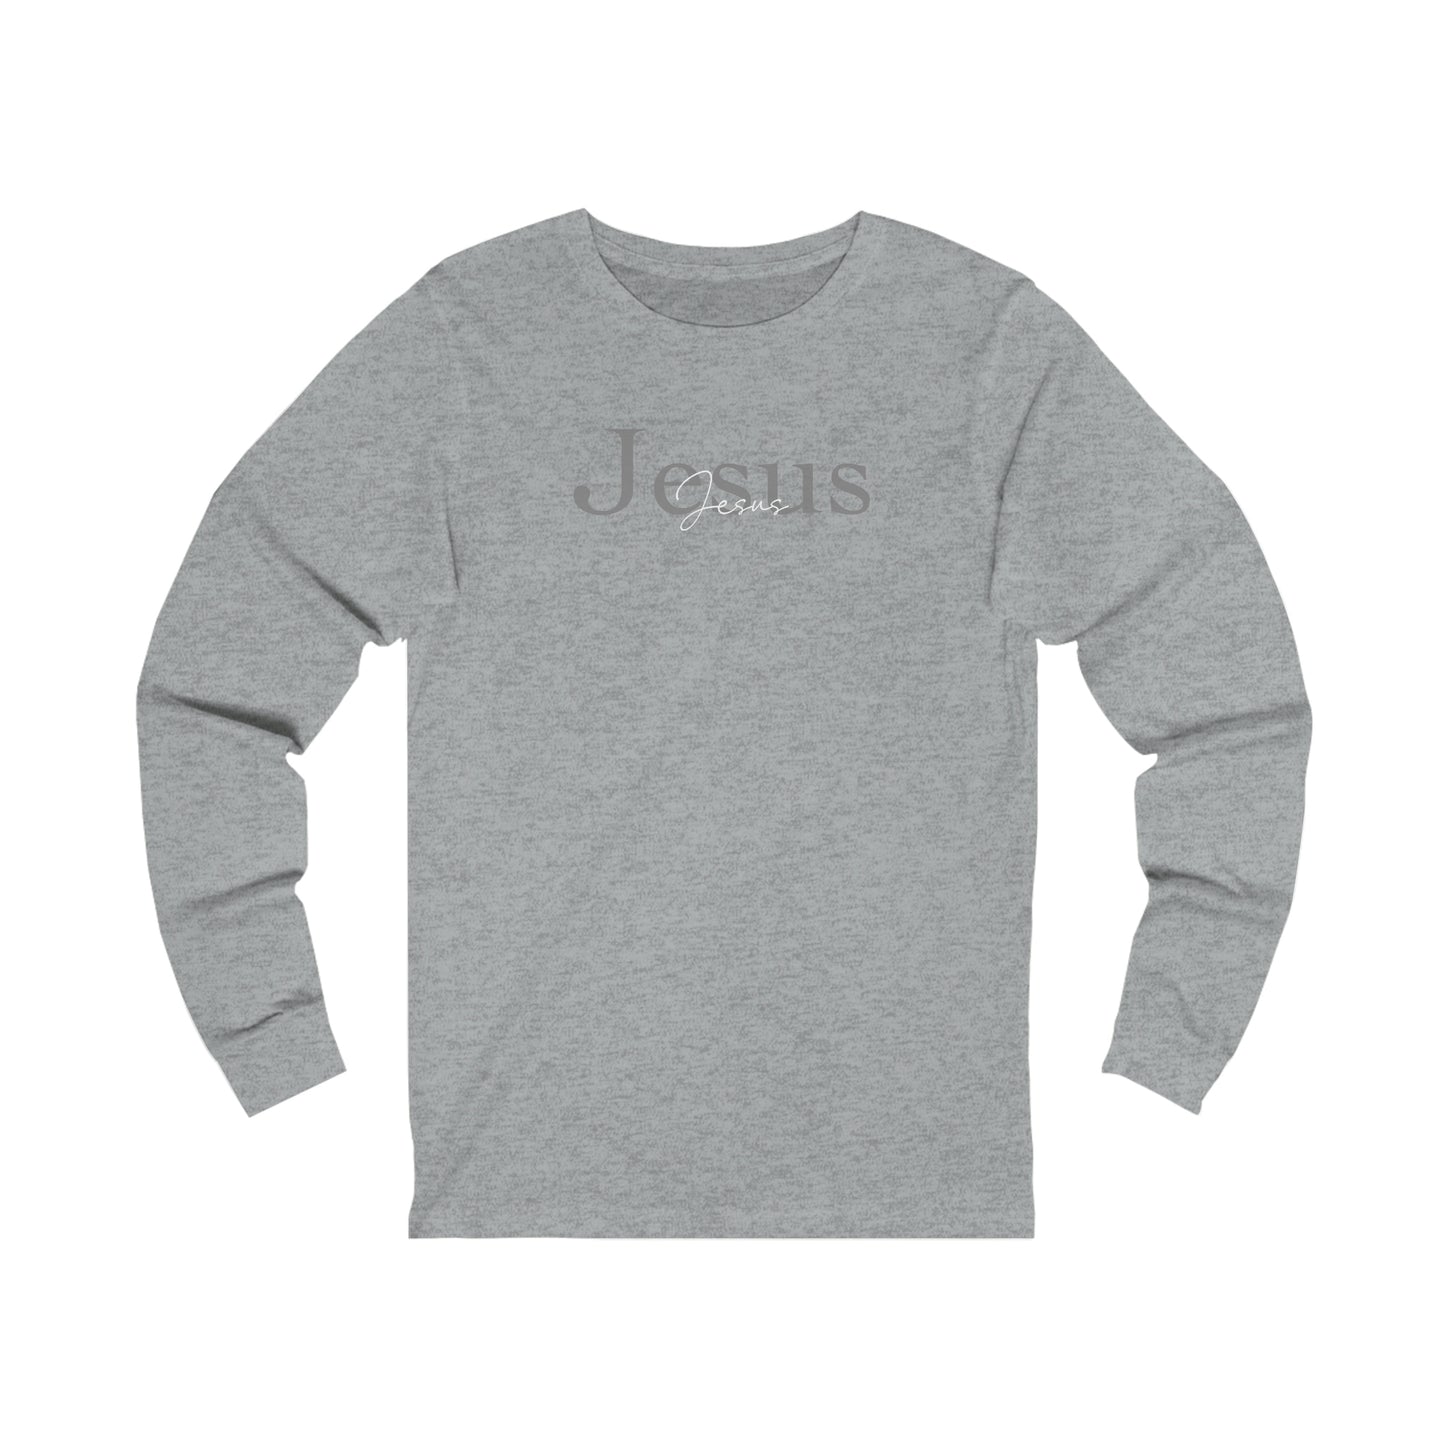 Jesus: Unisex Long Sleeve (Available in more colors)